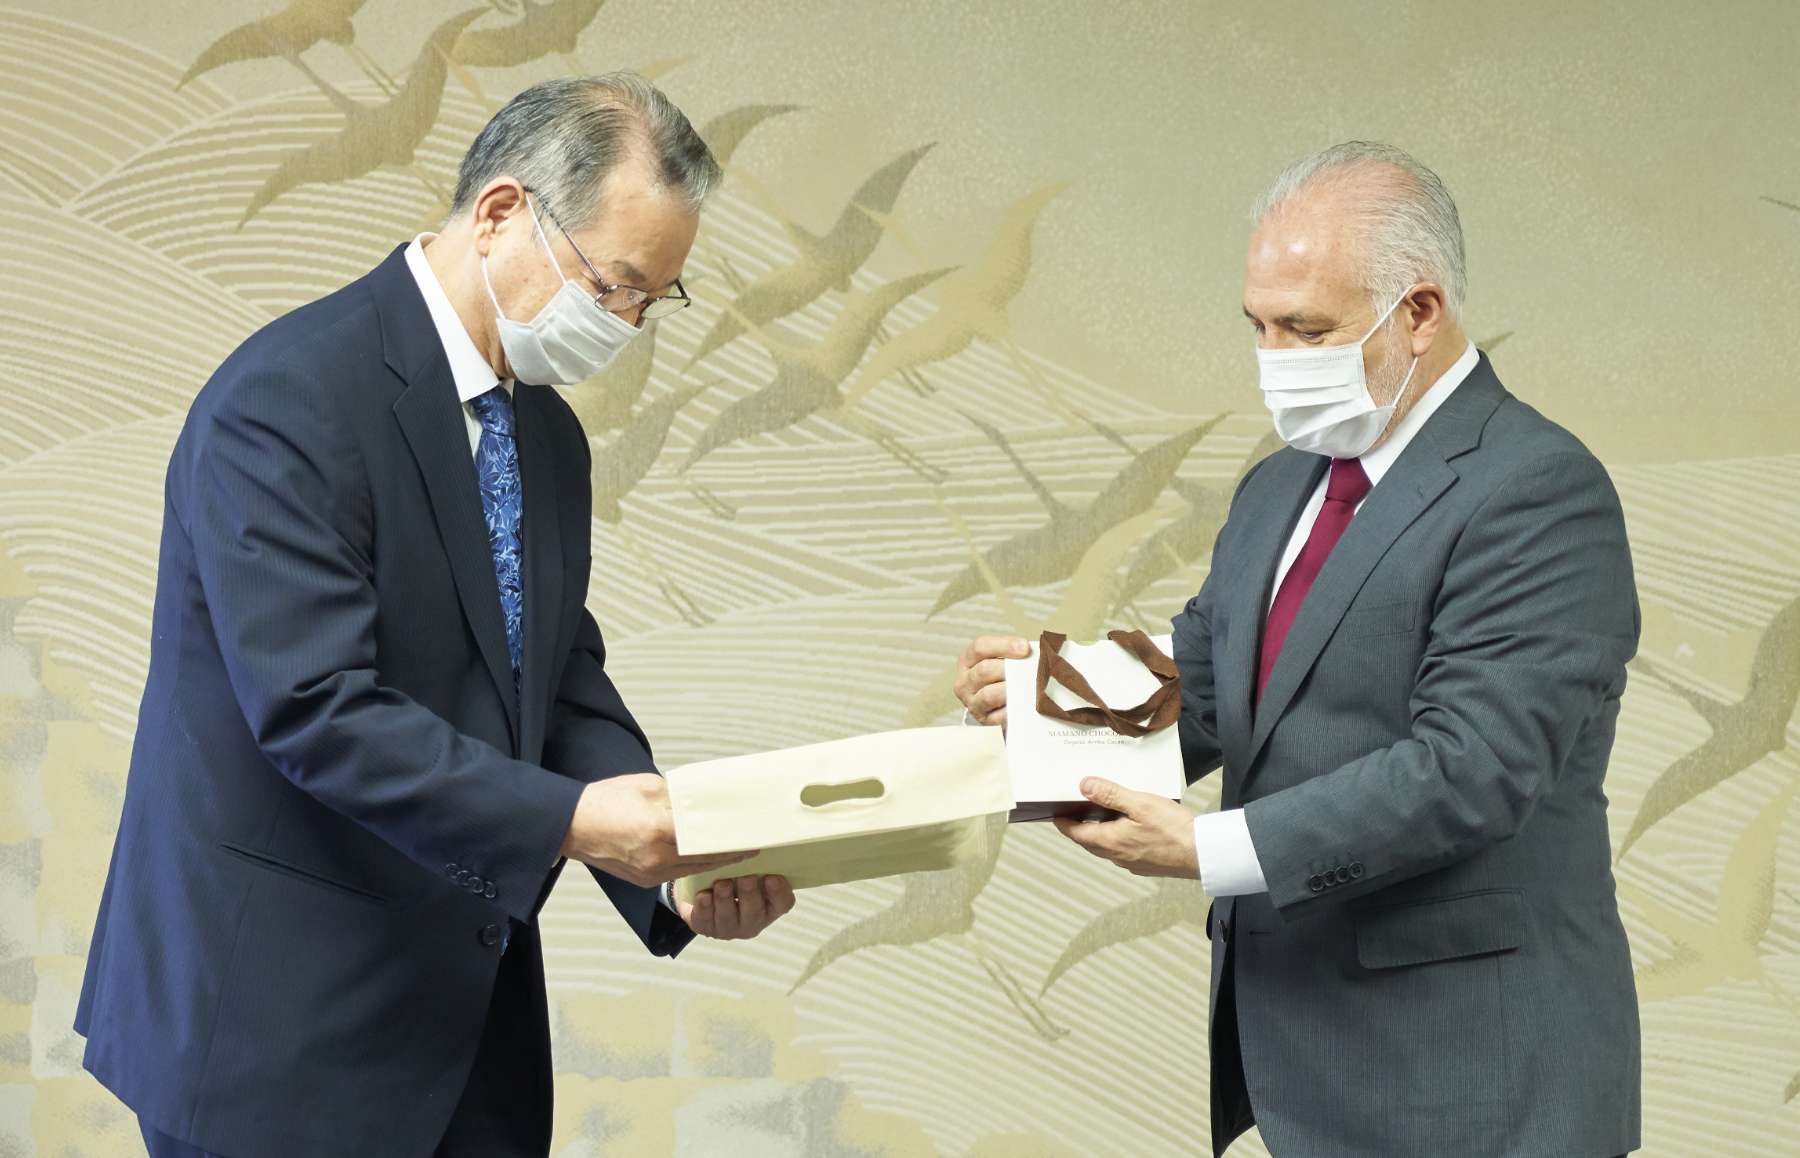 Two men wearing suits and face masks pass a formal document one to the other in front of a background illustration of cranes taking flight.